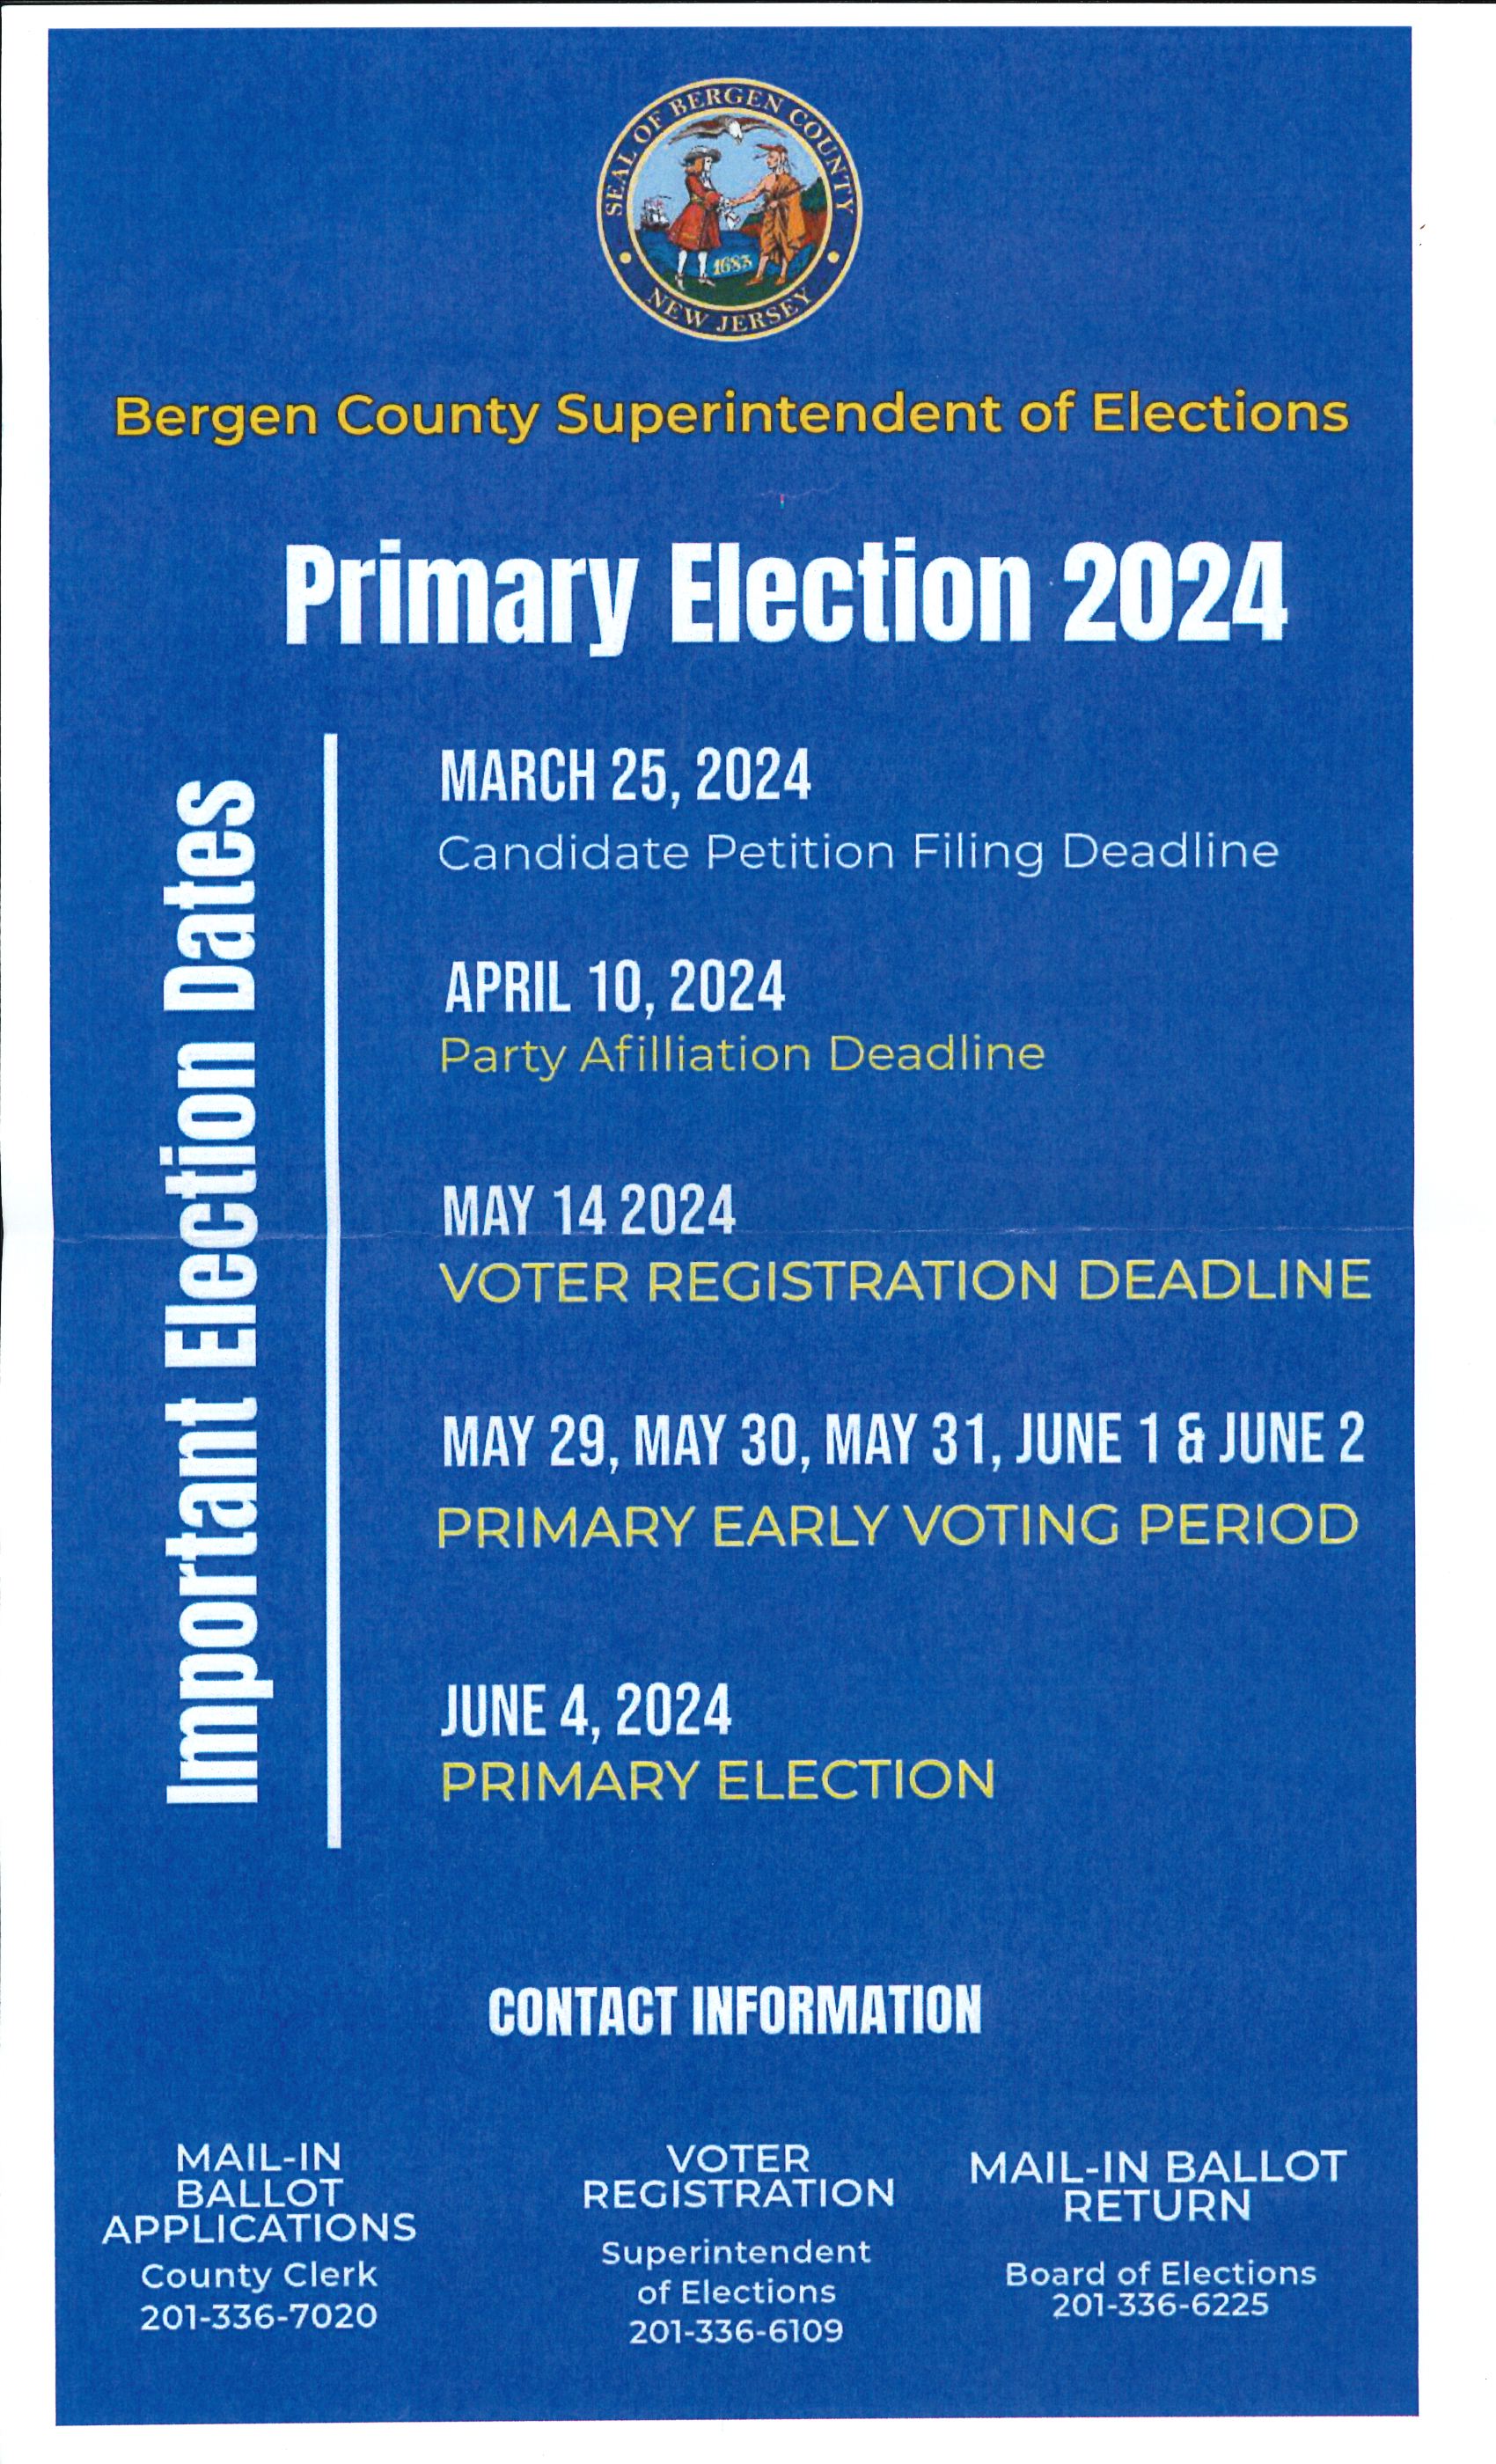 The Borough of Montvale Important 2024 Primary Election Dates